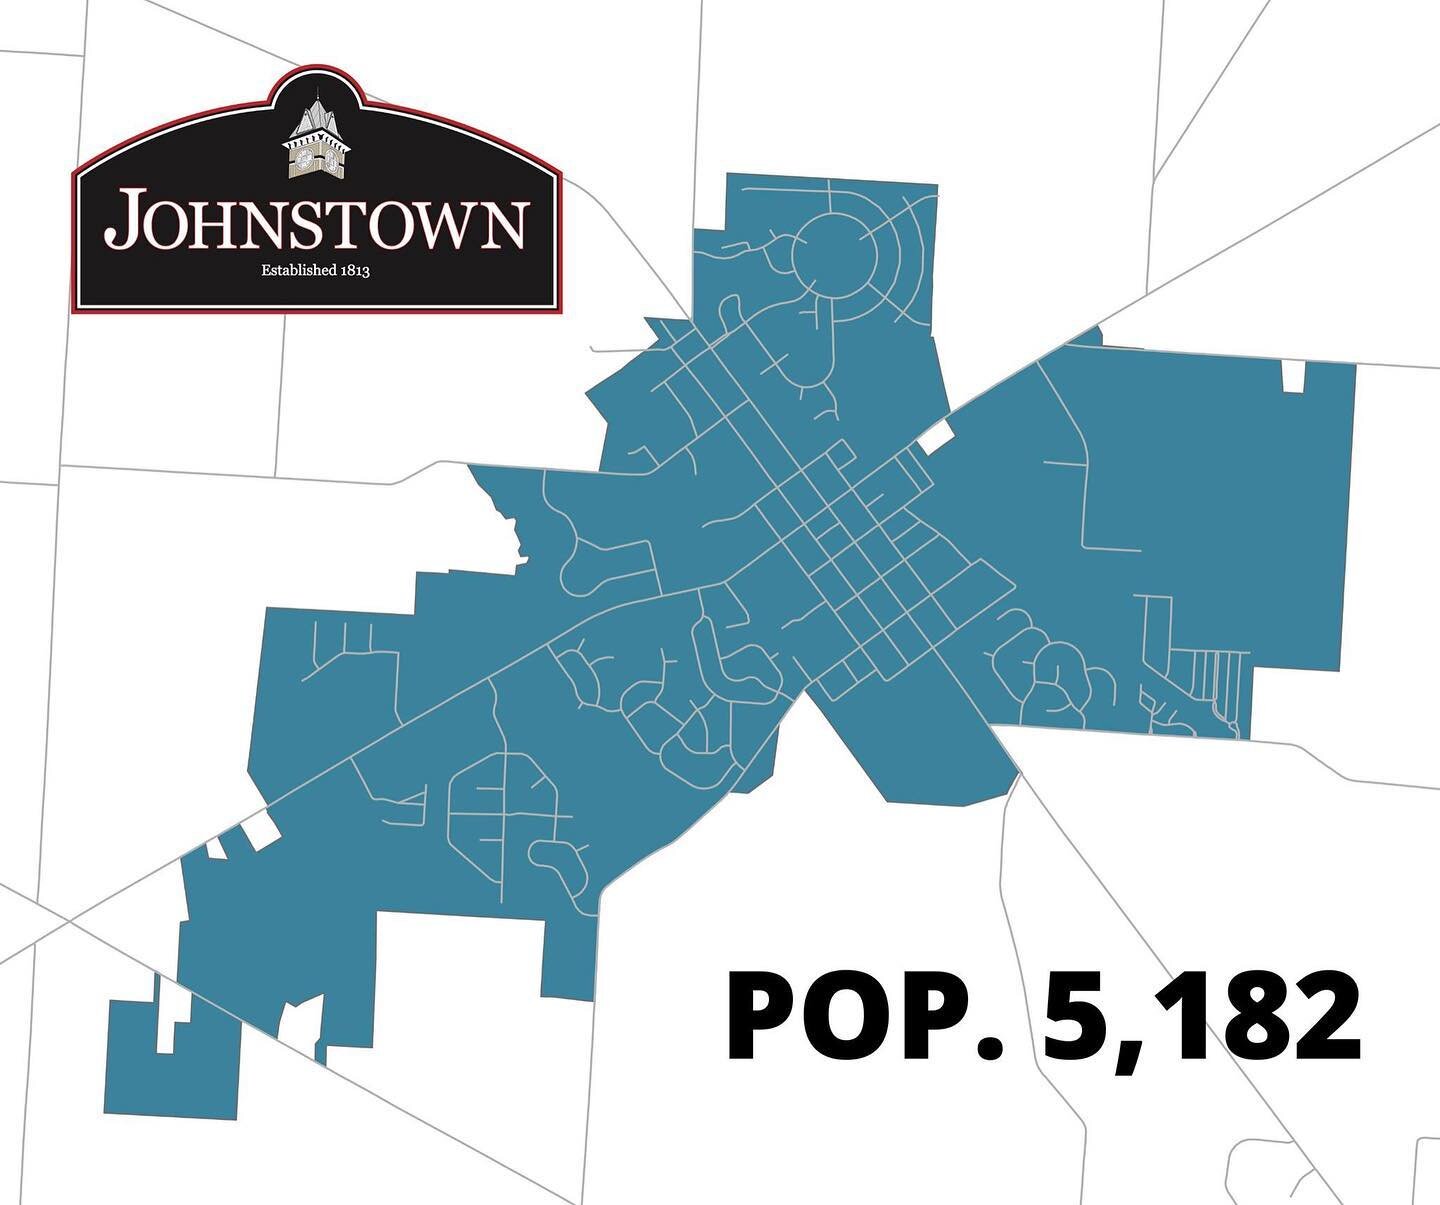 The 2020 Census has been released. As of April 1, 2020 Johnstown's population is 5,182. 

This is a 11% increase from 2010 when we had 4,632 residents.

Licking County has 178,519 residents (up 7.2%).